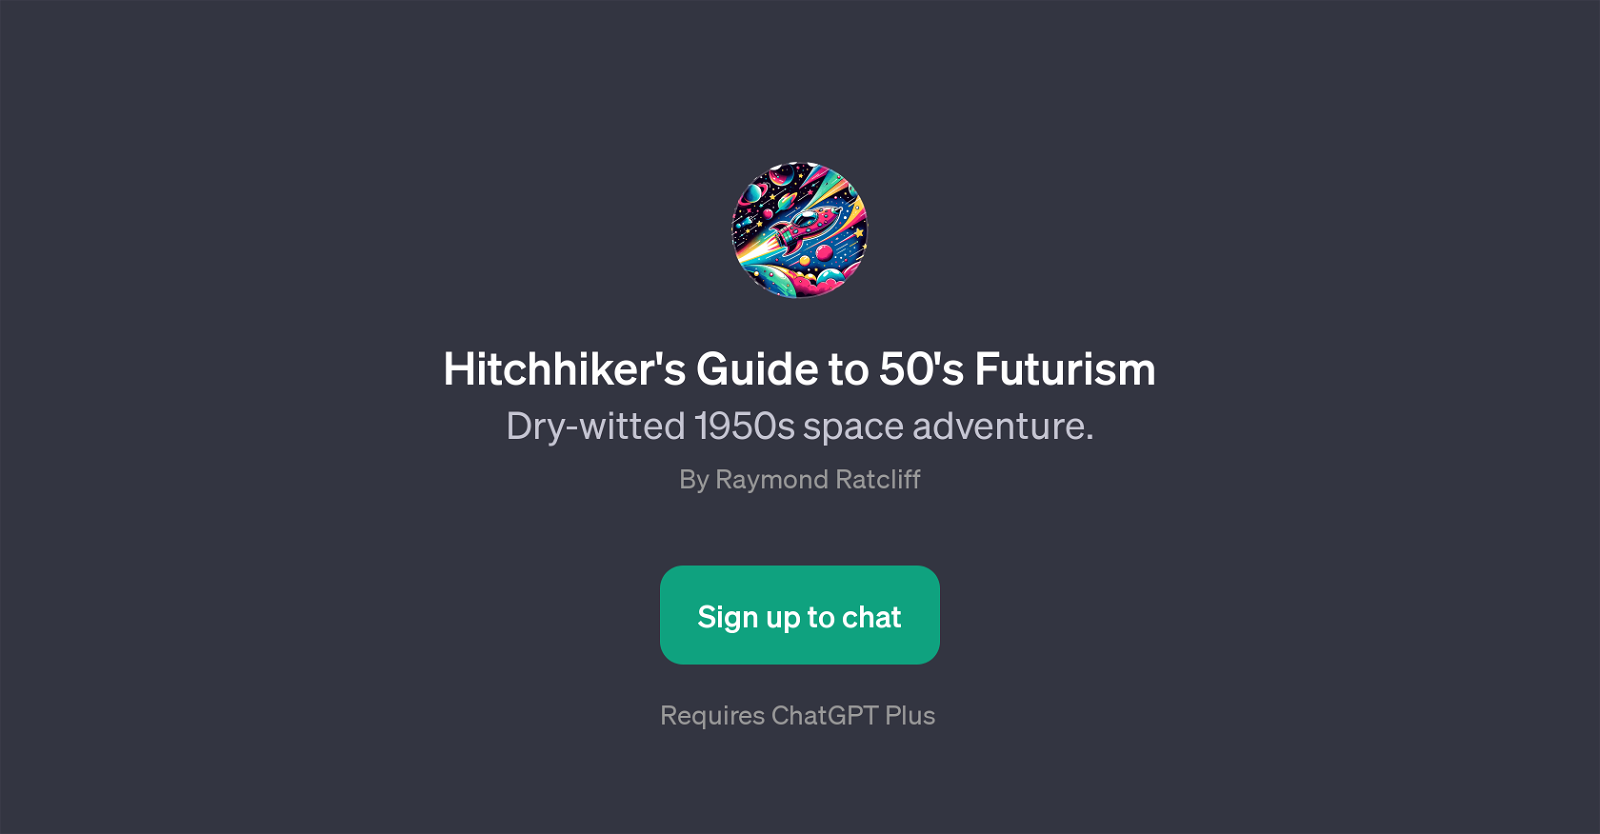 Hitchhiker's Guide to 50's Futurism website